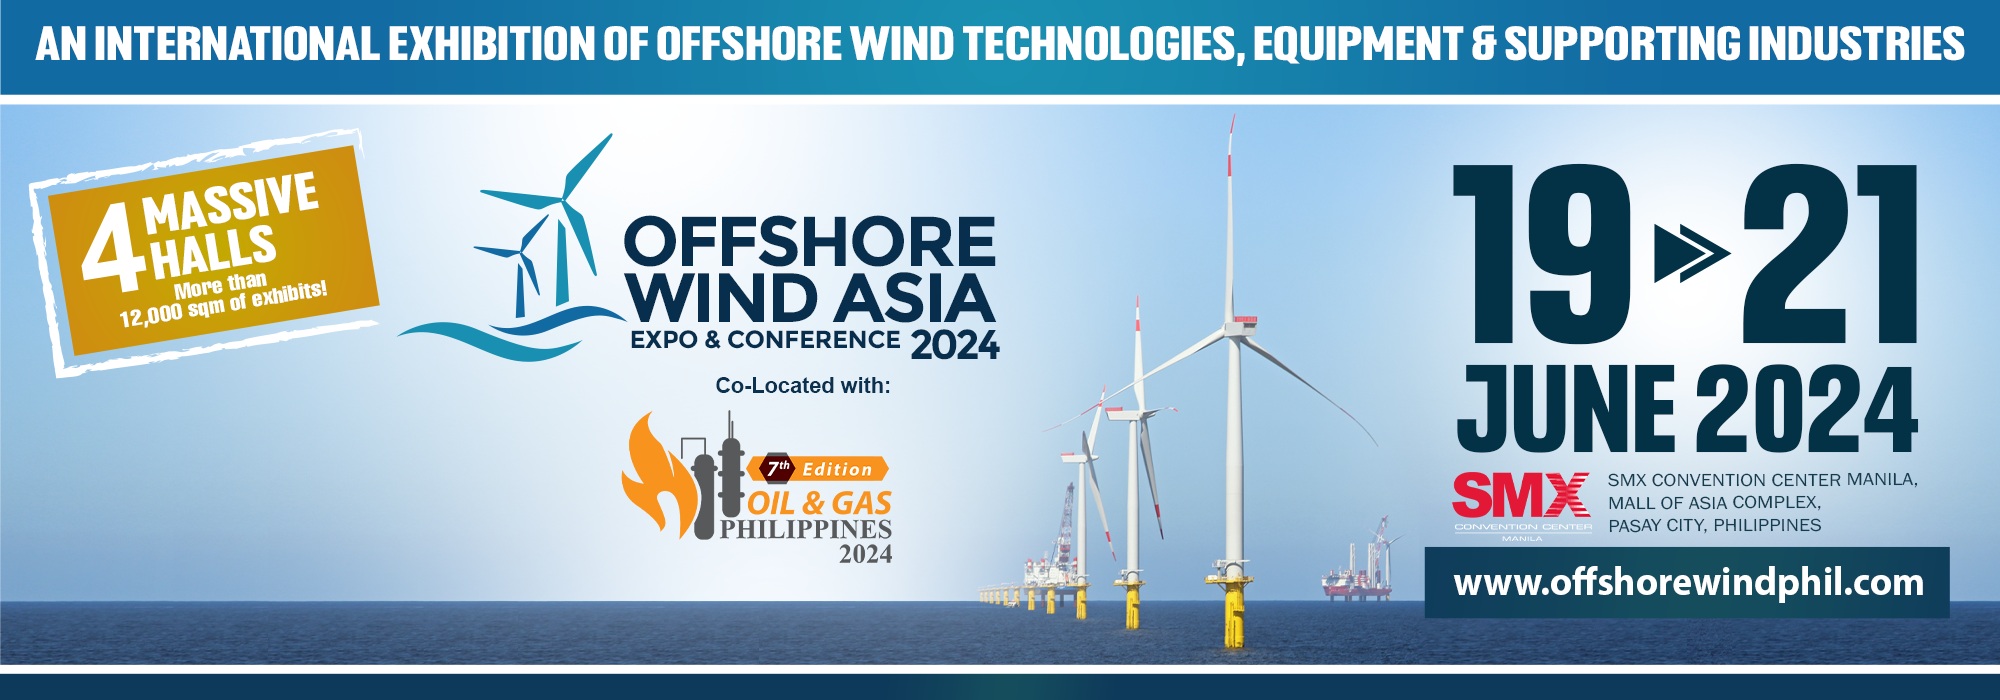 Offshore Wind Asia Expo & Conference 2024, Pasay City, National Capital Region, Philippines